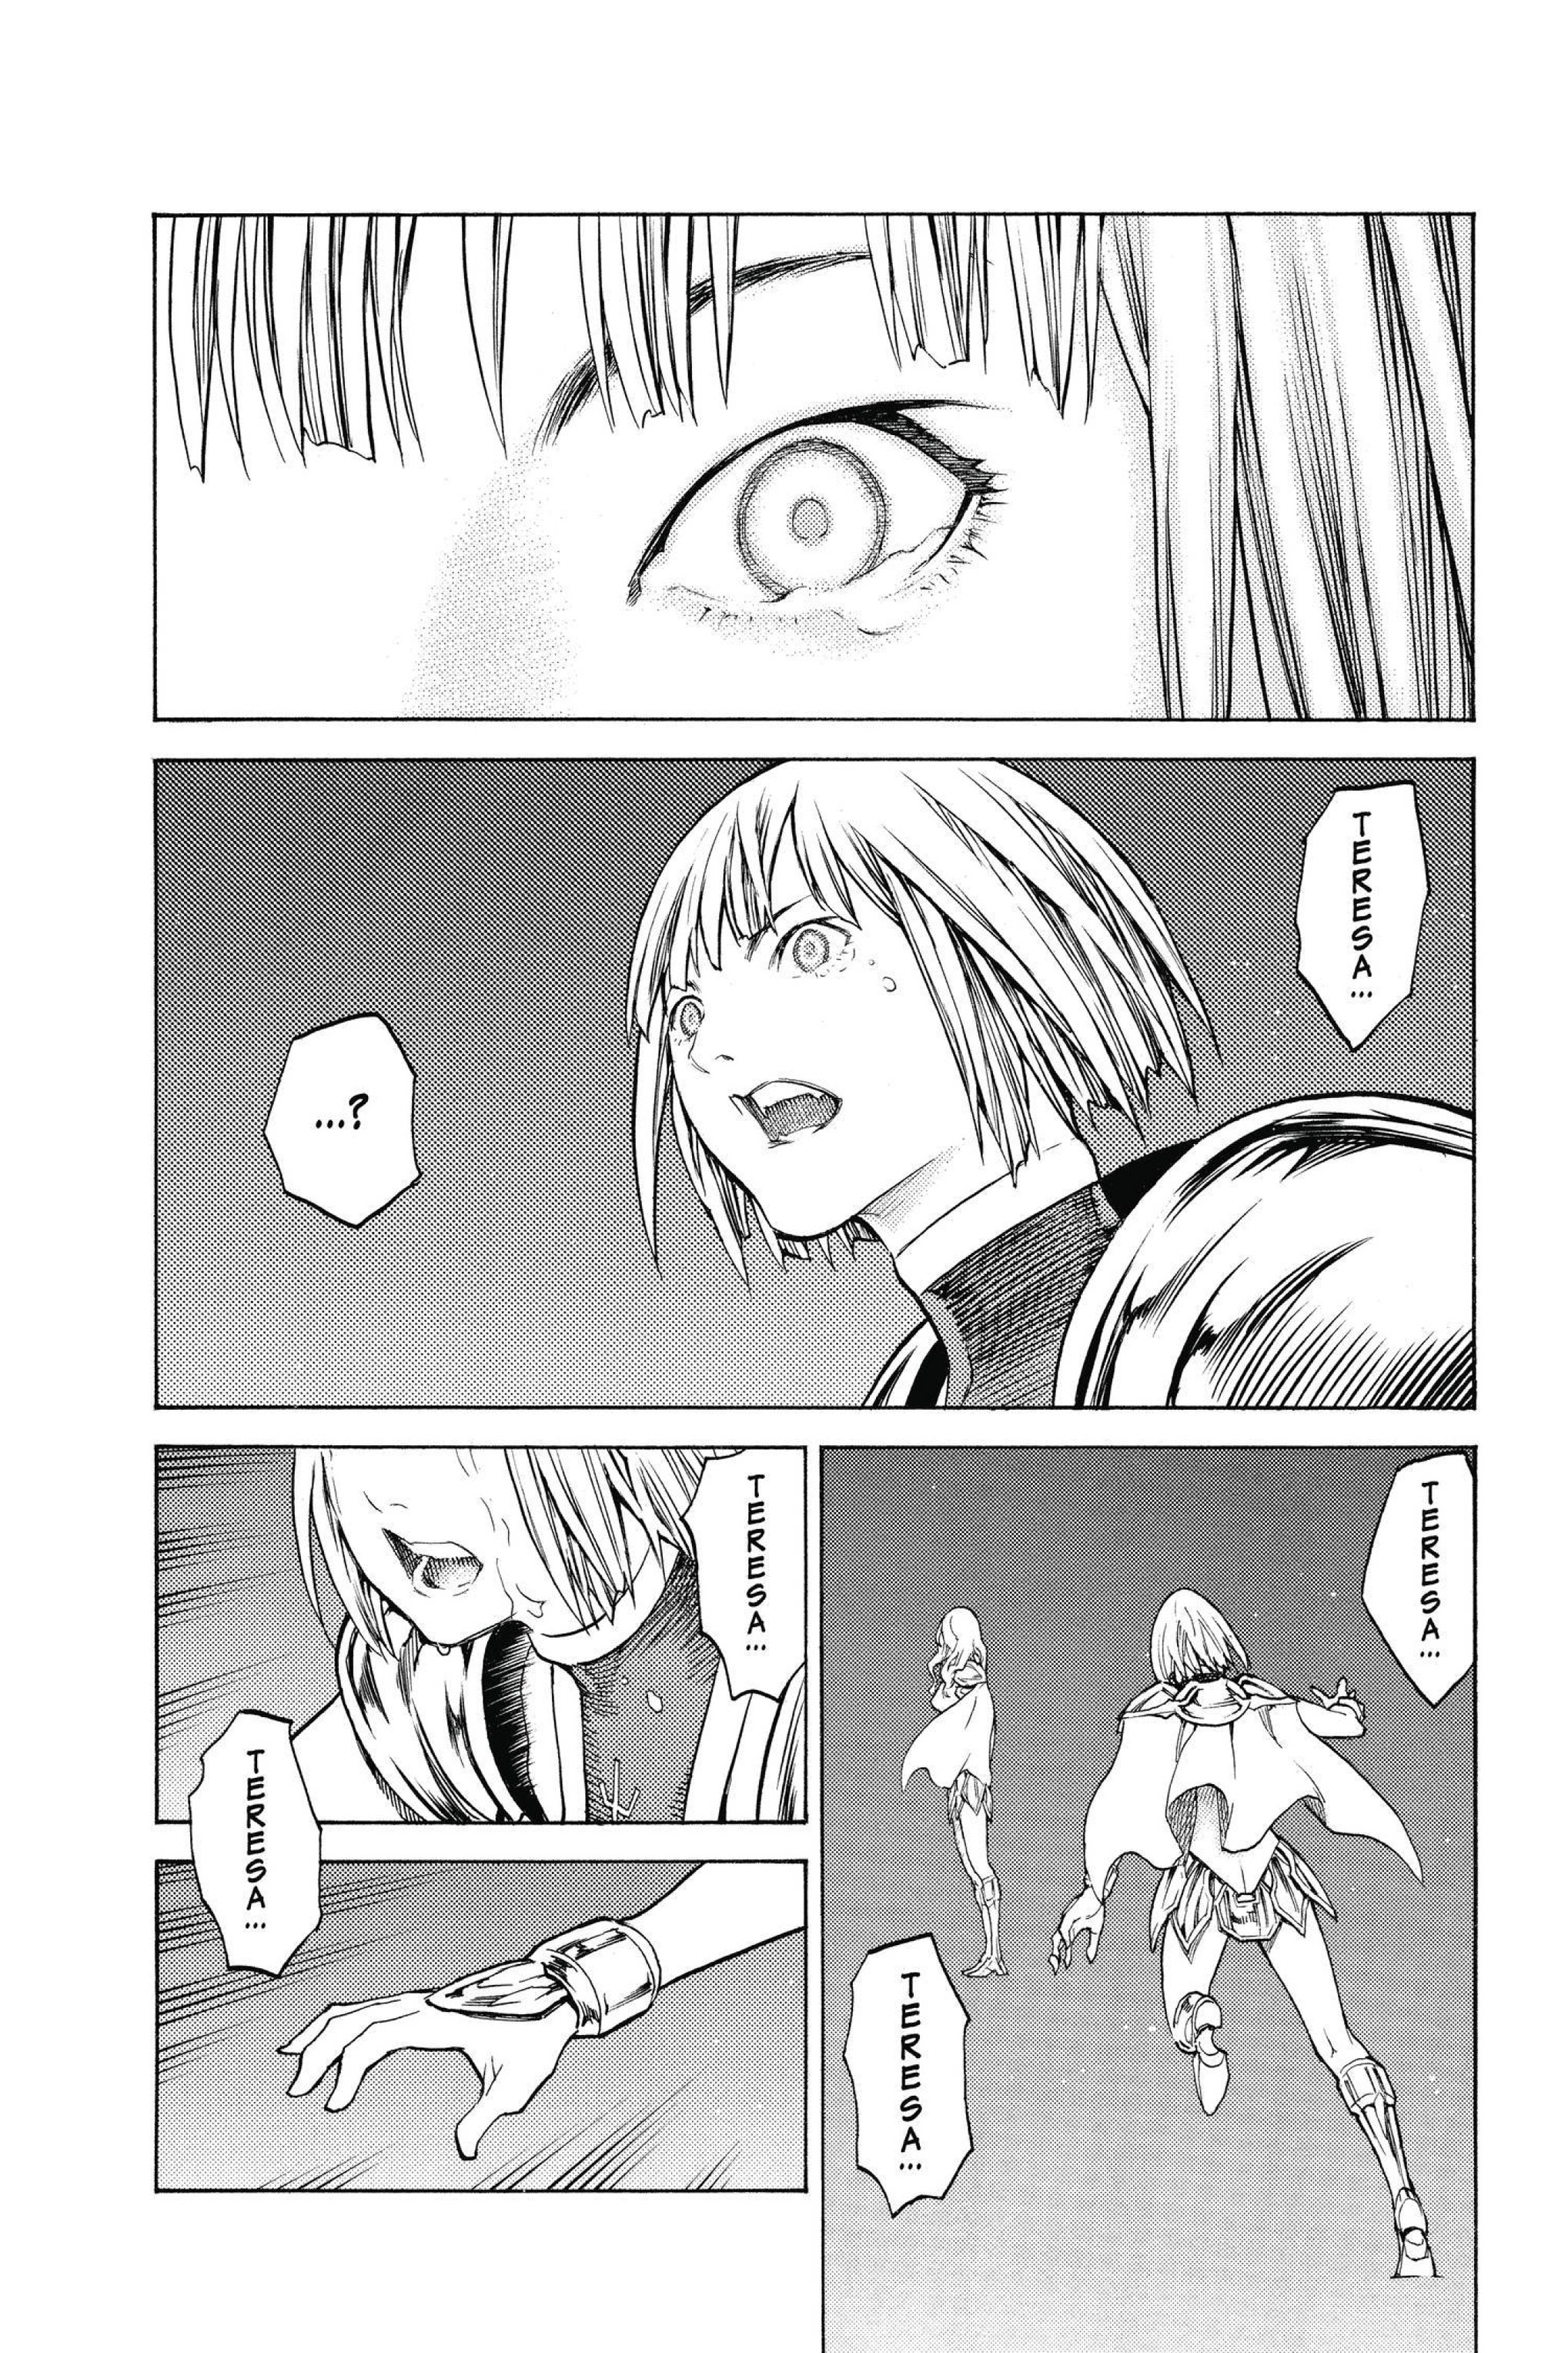 Read online Claymore comic -  Issue #27 - 16